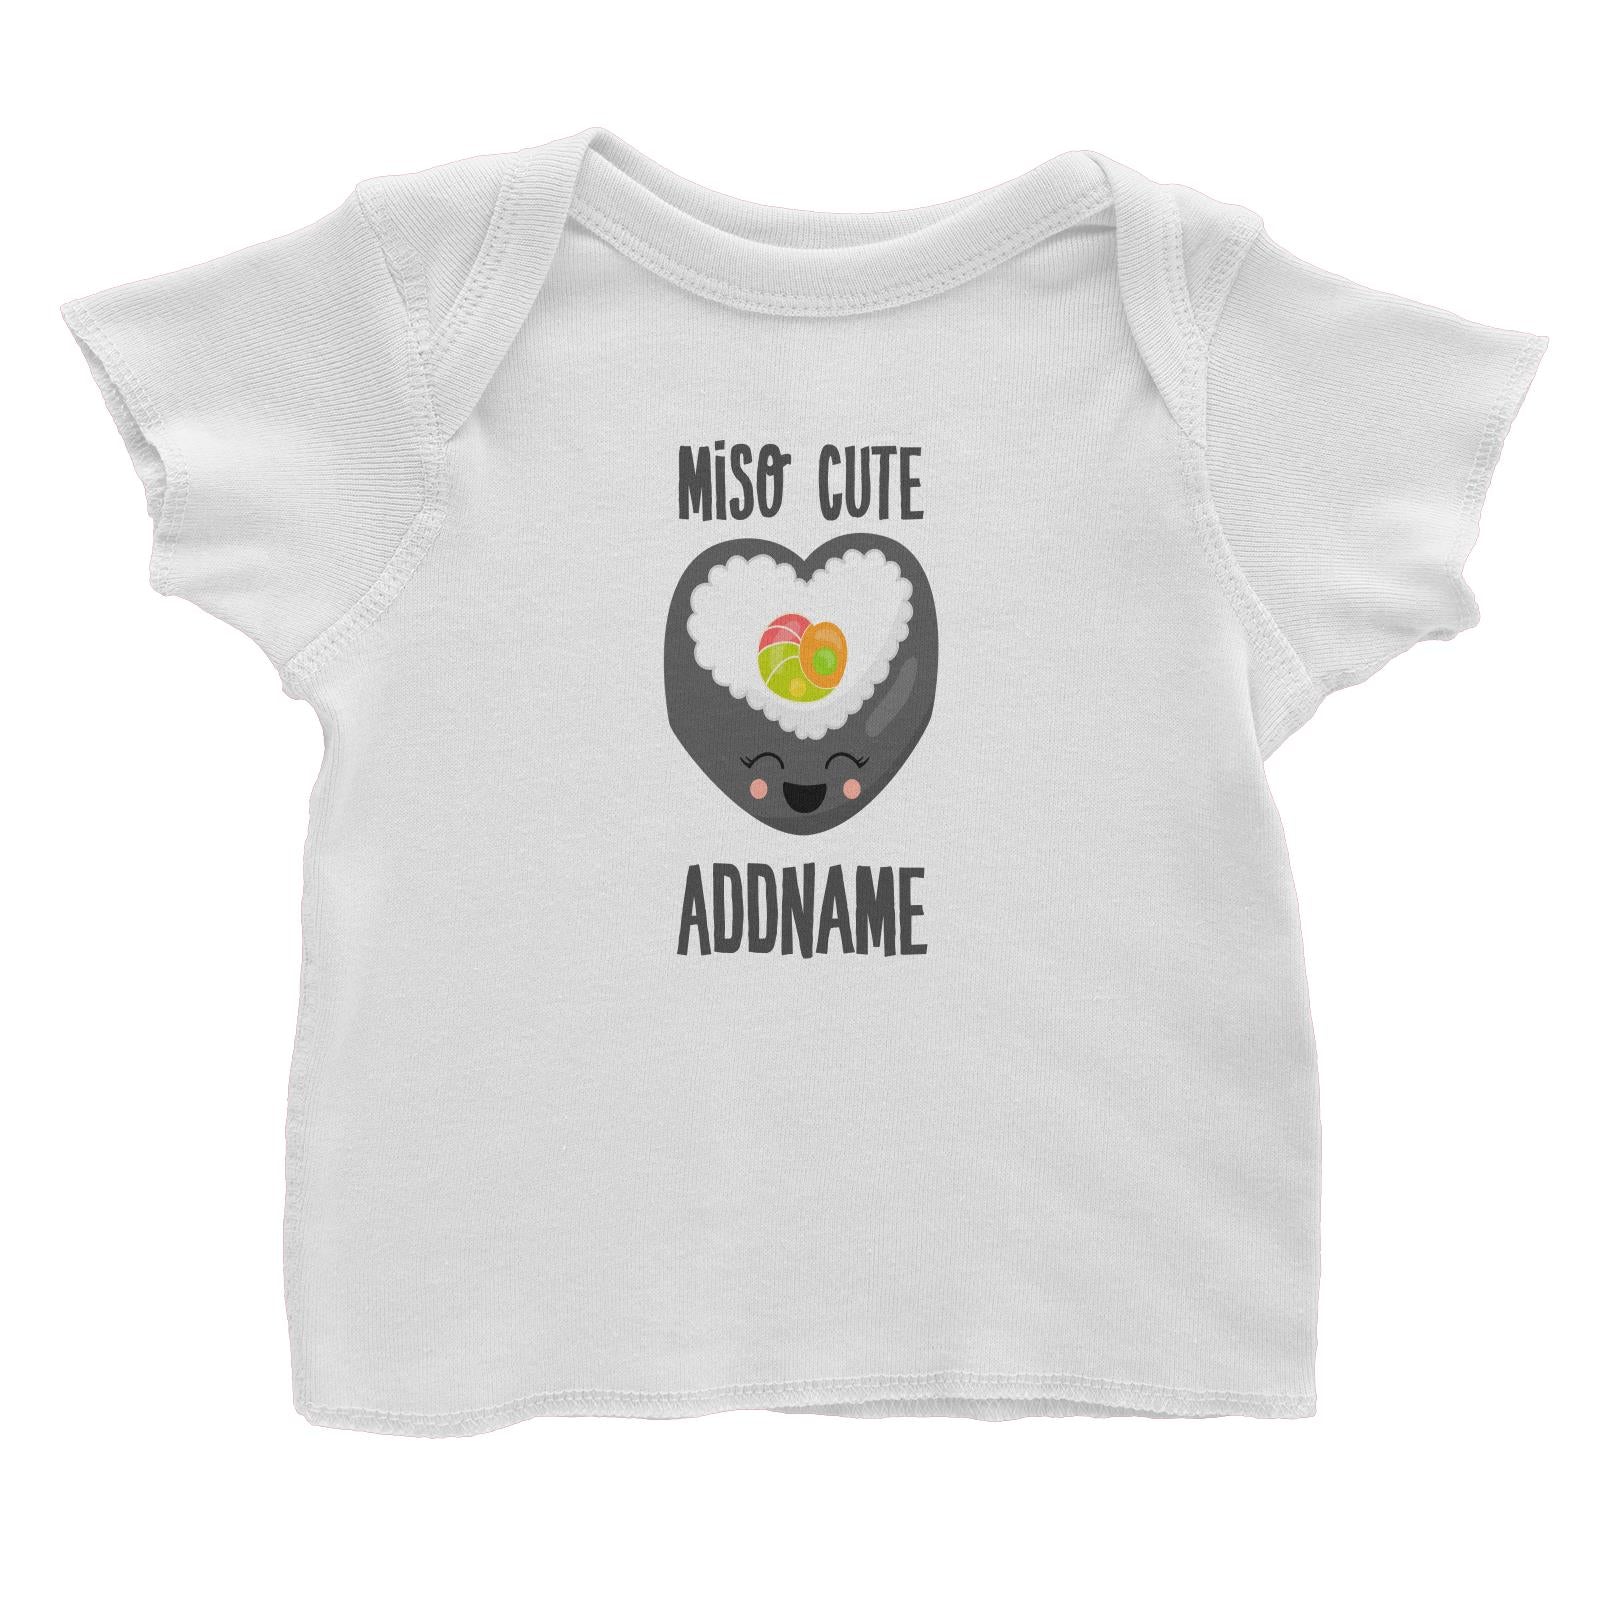 Miso Cute Sushi Heart Roll Addname Baby T-Shirt